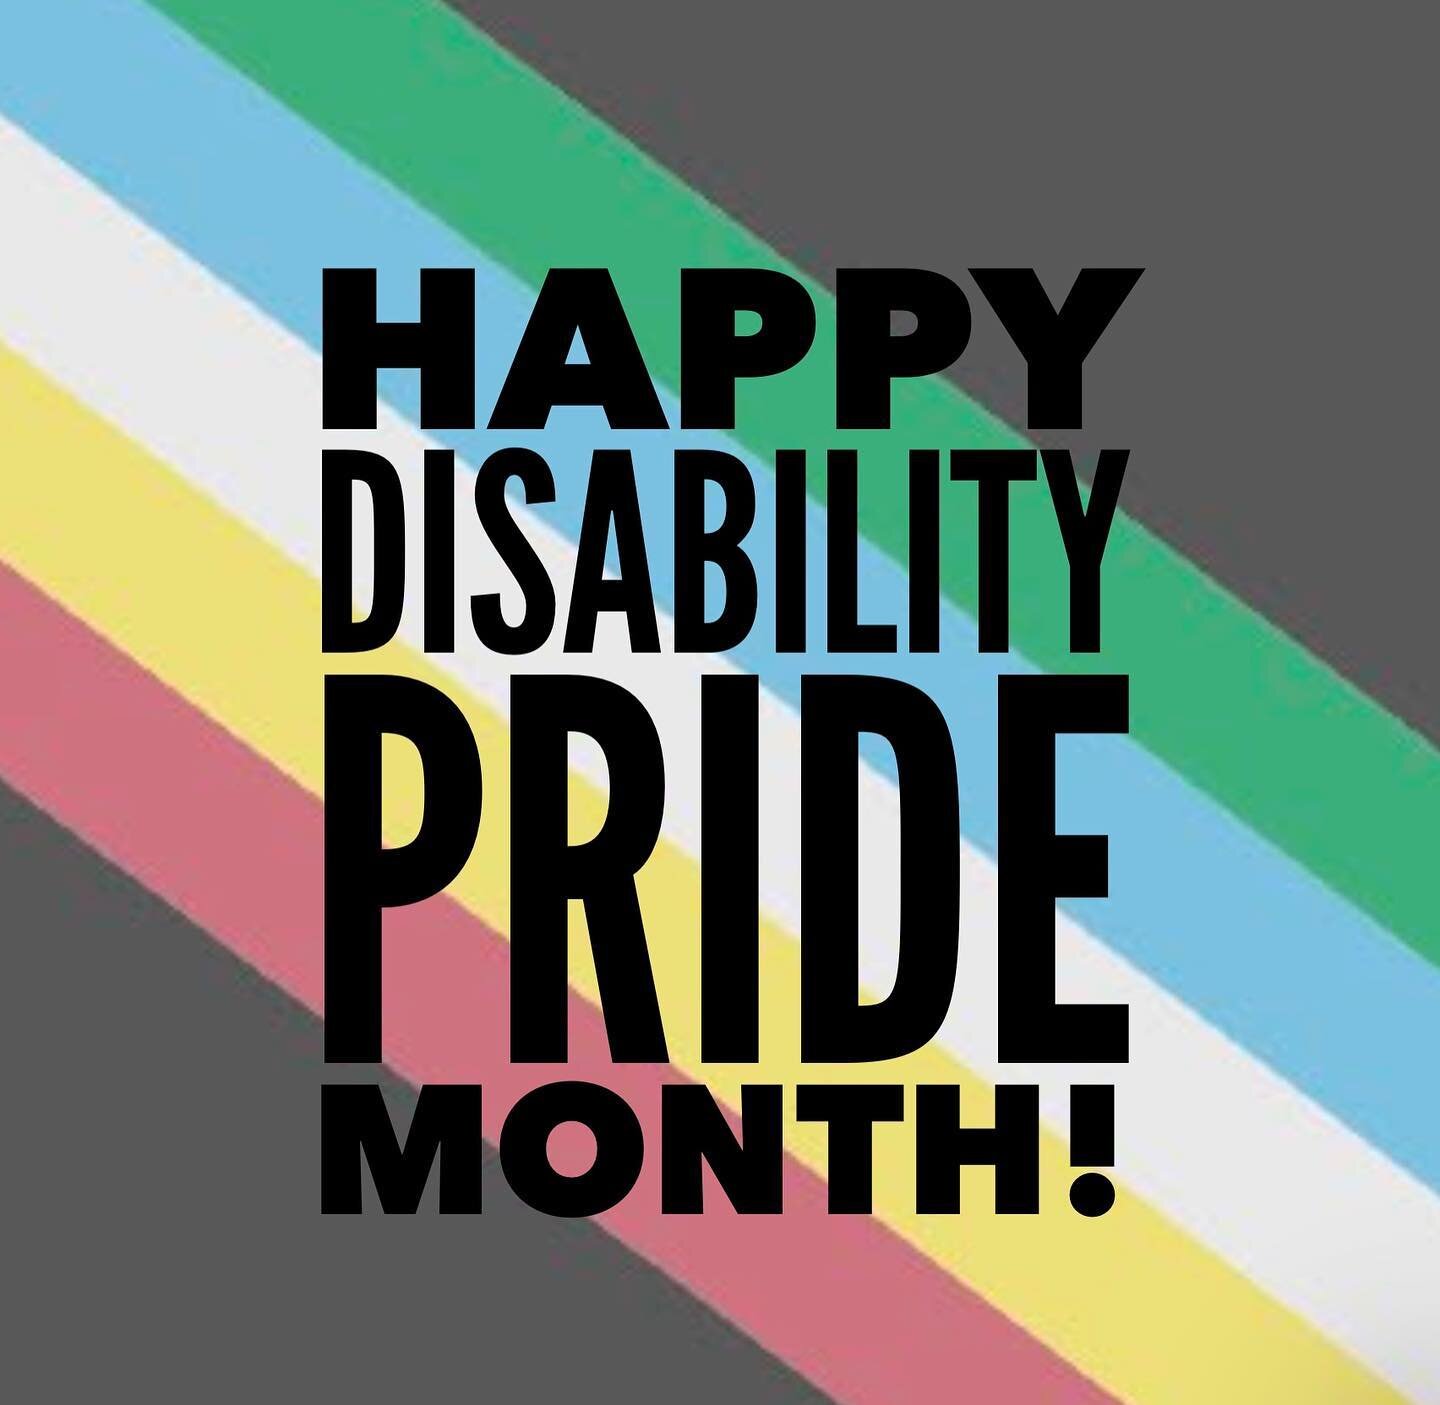 July is #DisabilityPrideMonth

&amp; 

July 26th

marks the 33rd anniversary of the passage of The #AmericansWithDisabilities Act!

See what some amazing #disabled creators in #TheGreatNowWhat are up to!

Documentary subject @maggiewhittum just finis